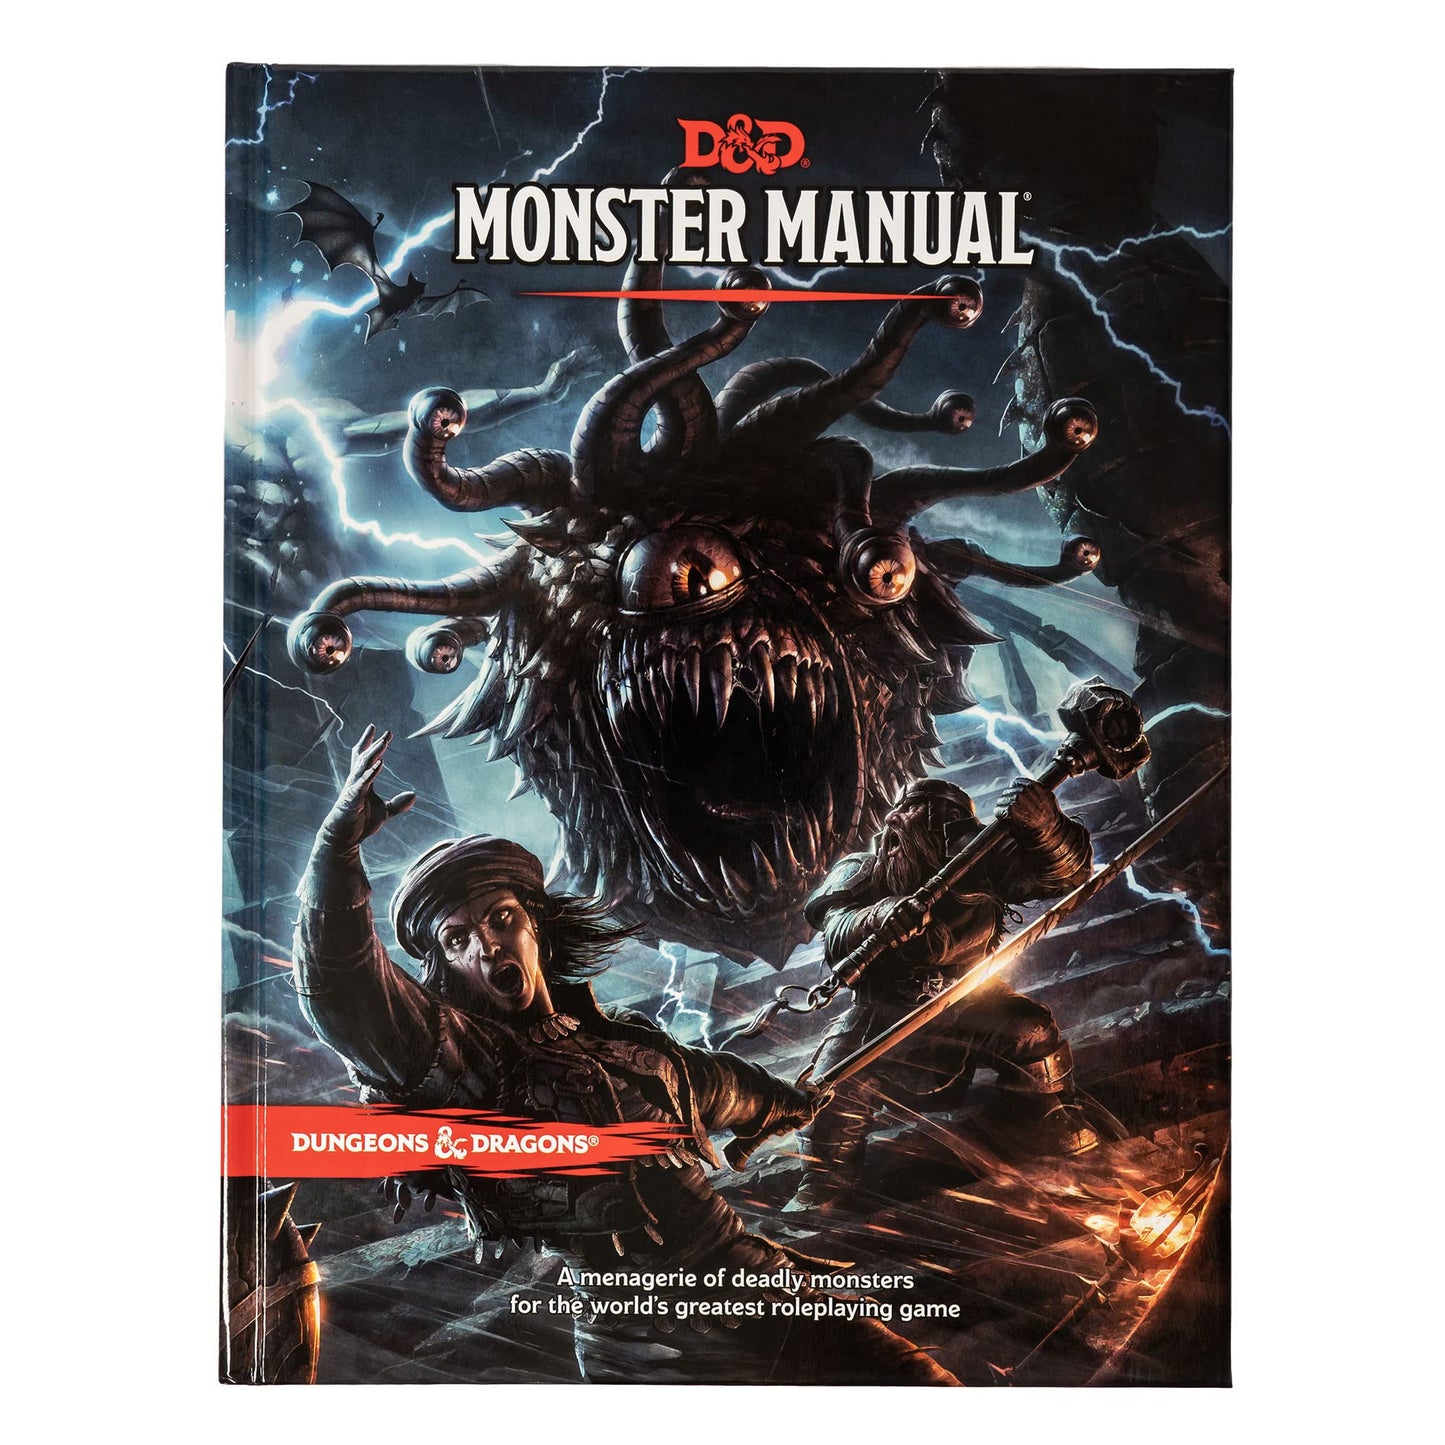 Dungeons & Dragons Monster Manual Hardcover